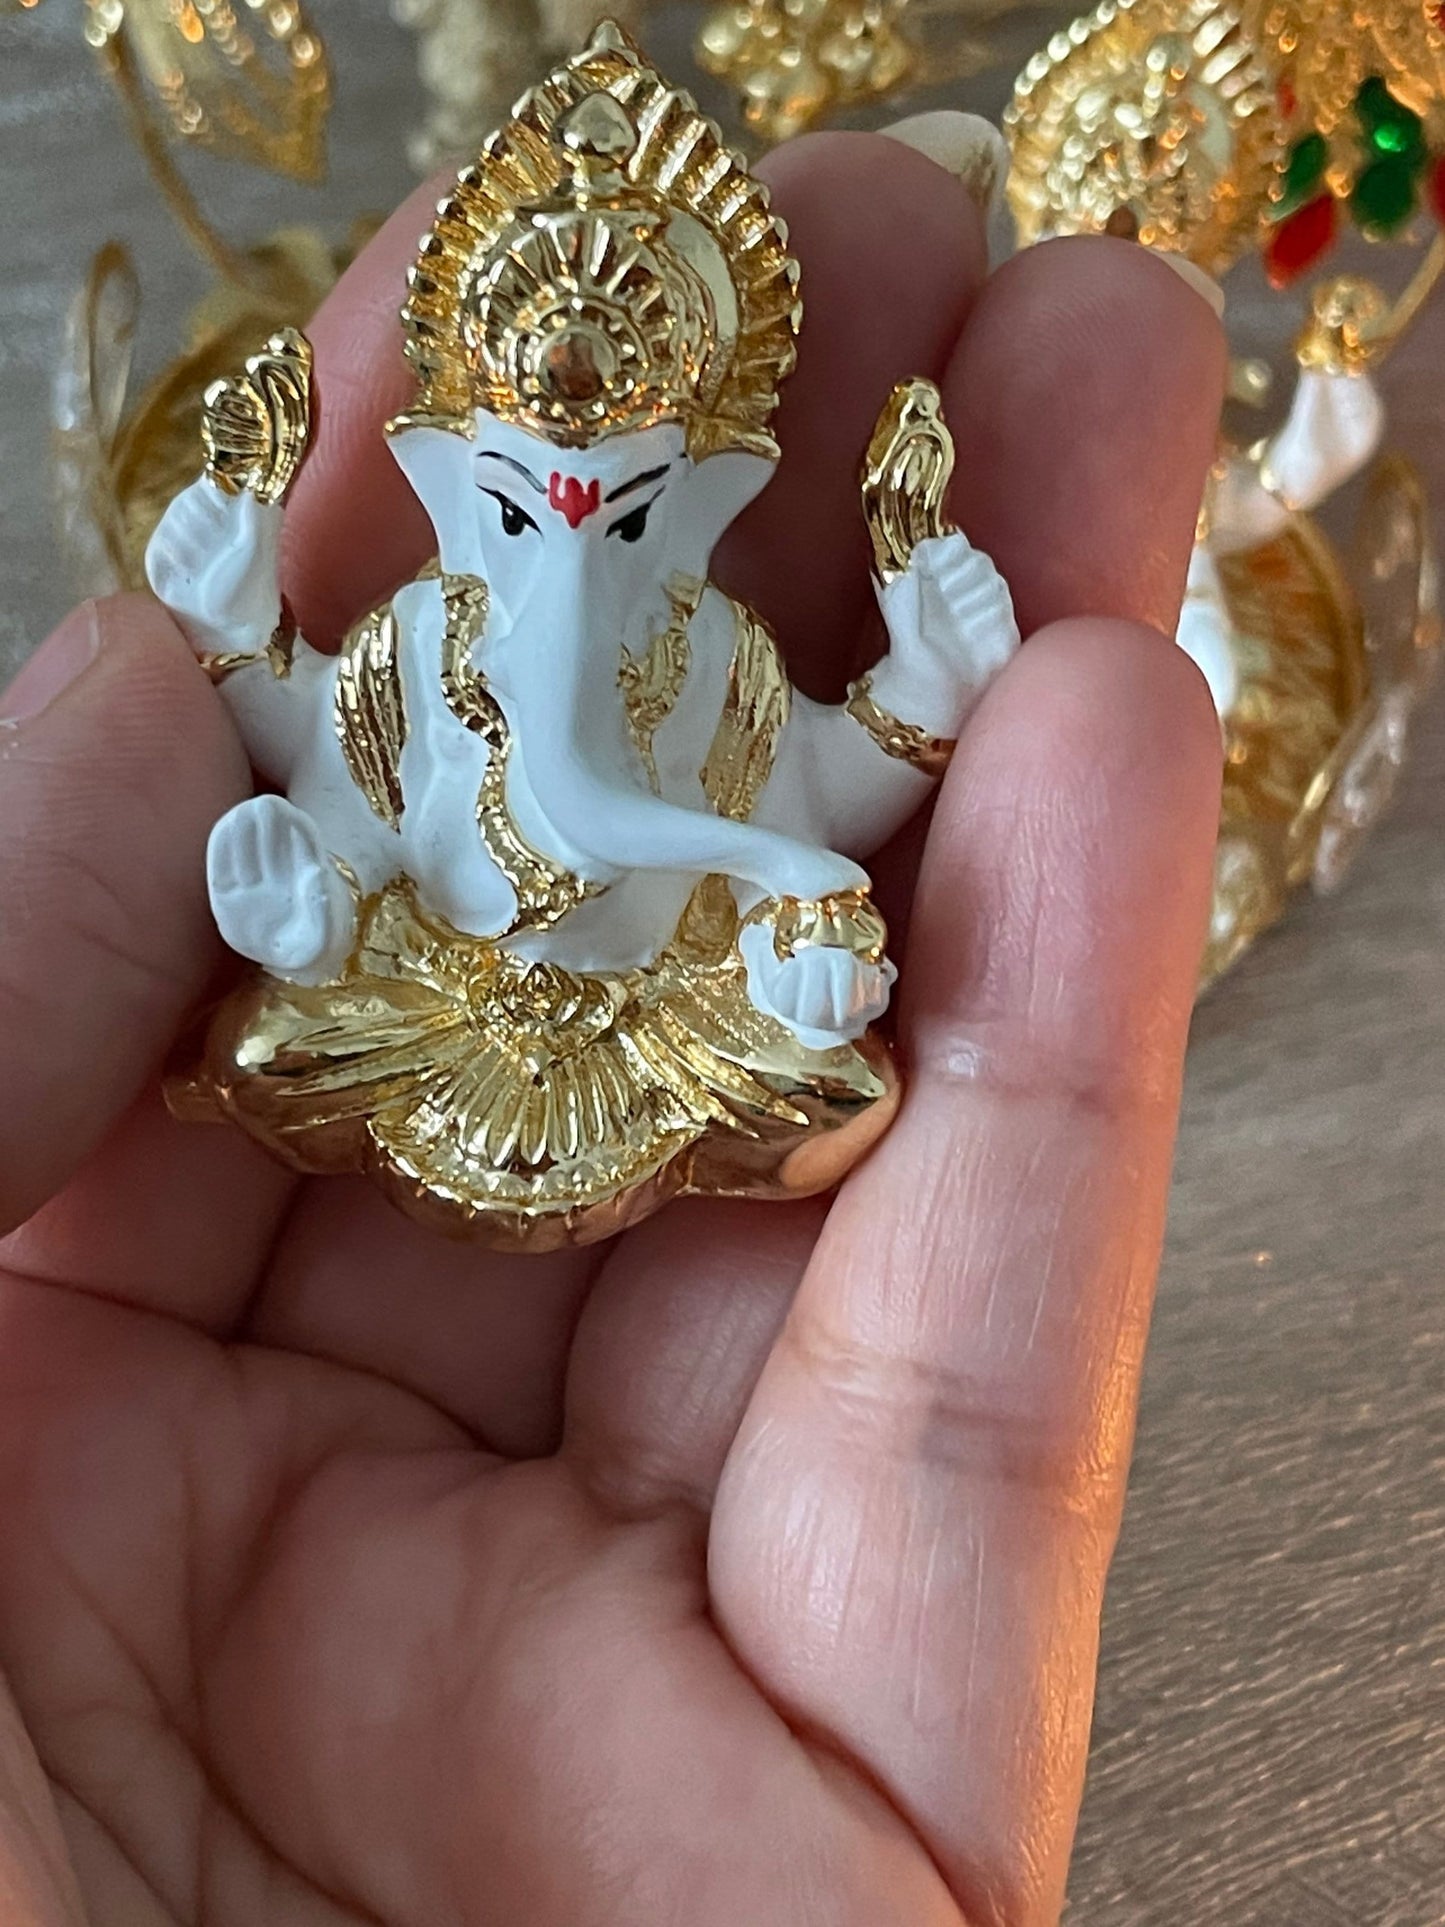 Lakshmi and Ganesh Figurines Sitting on on a Metal Khaat White Figurines with Golden plating accents Diwali Pooja Gifting